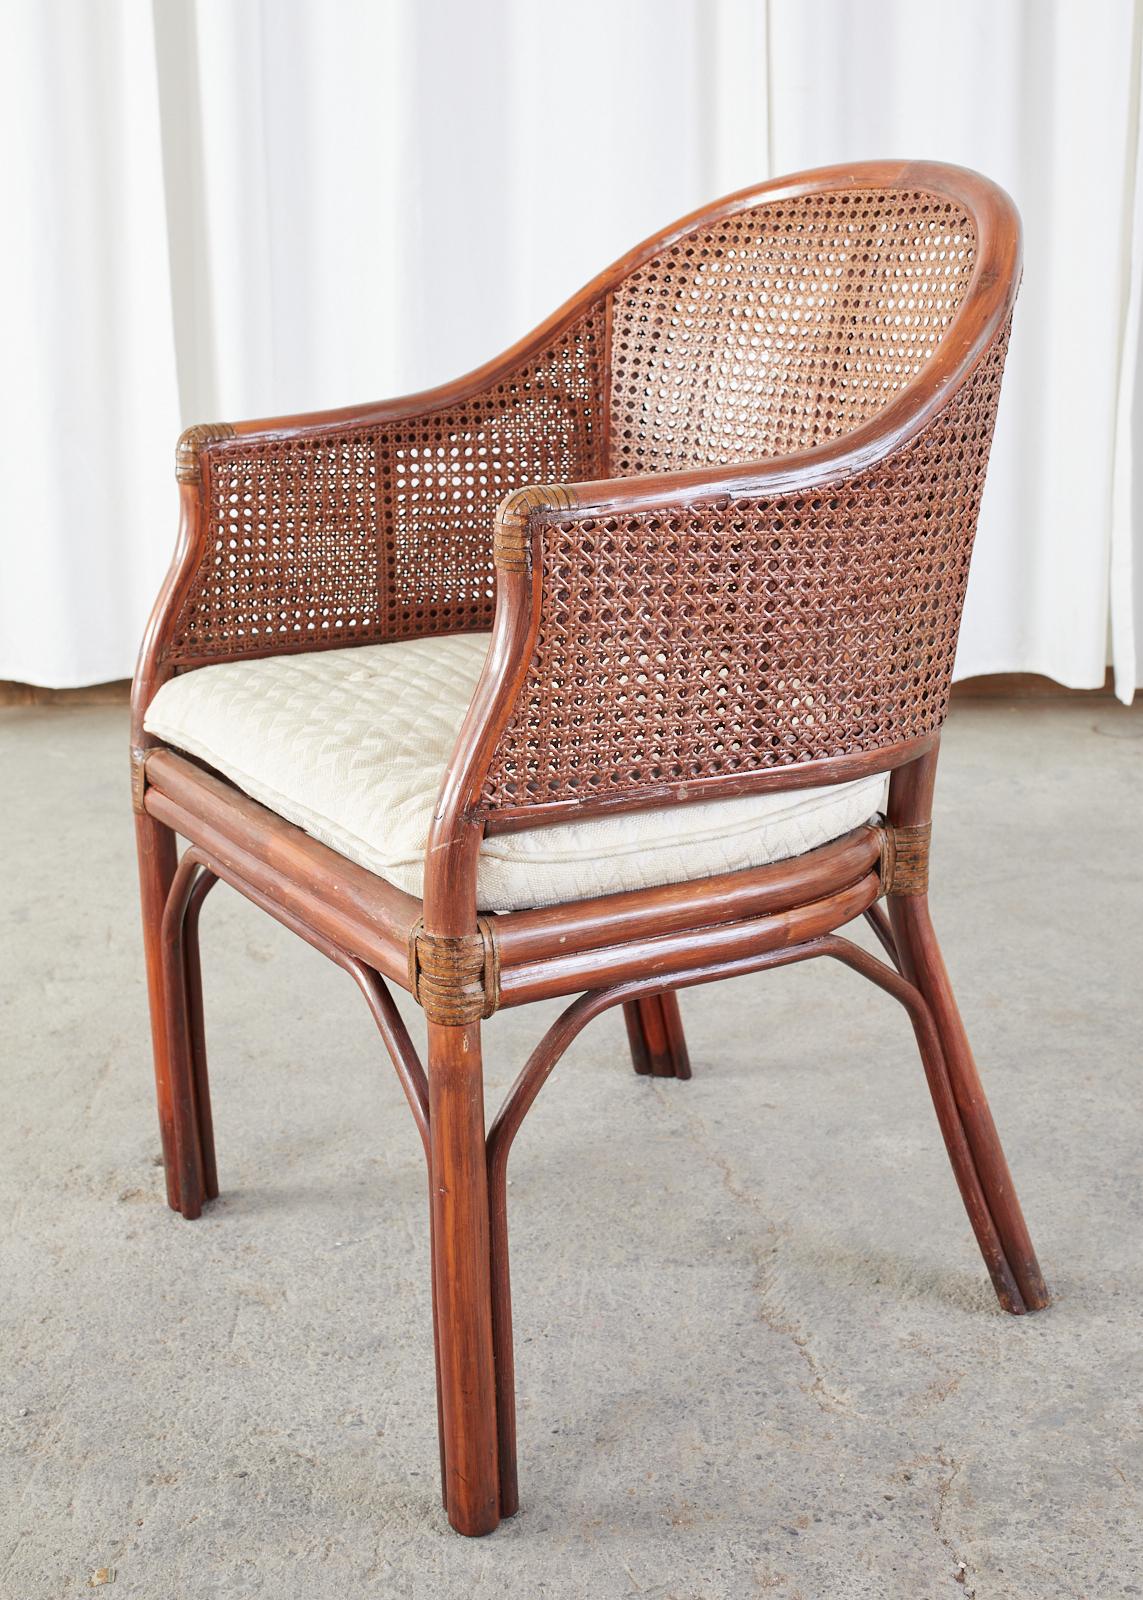 Set of Five McGuire Style Rattan Cane Barrel Back Dining Chairs 1